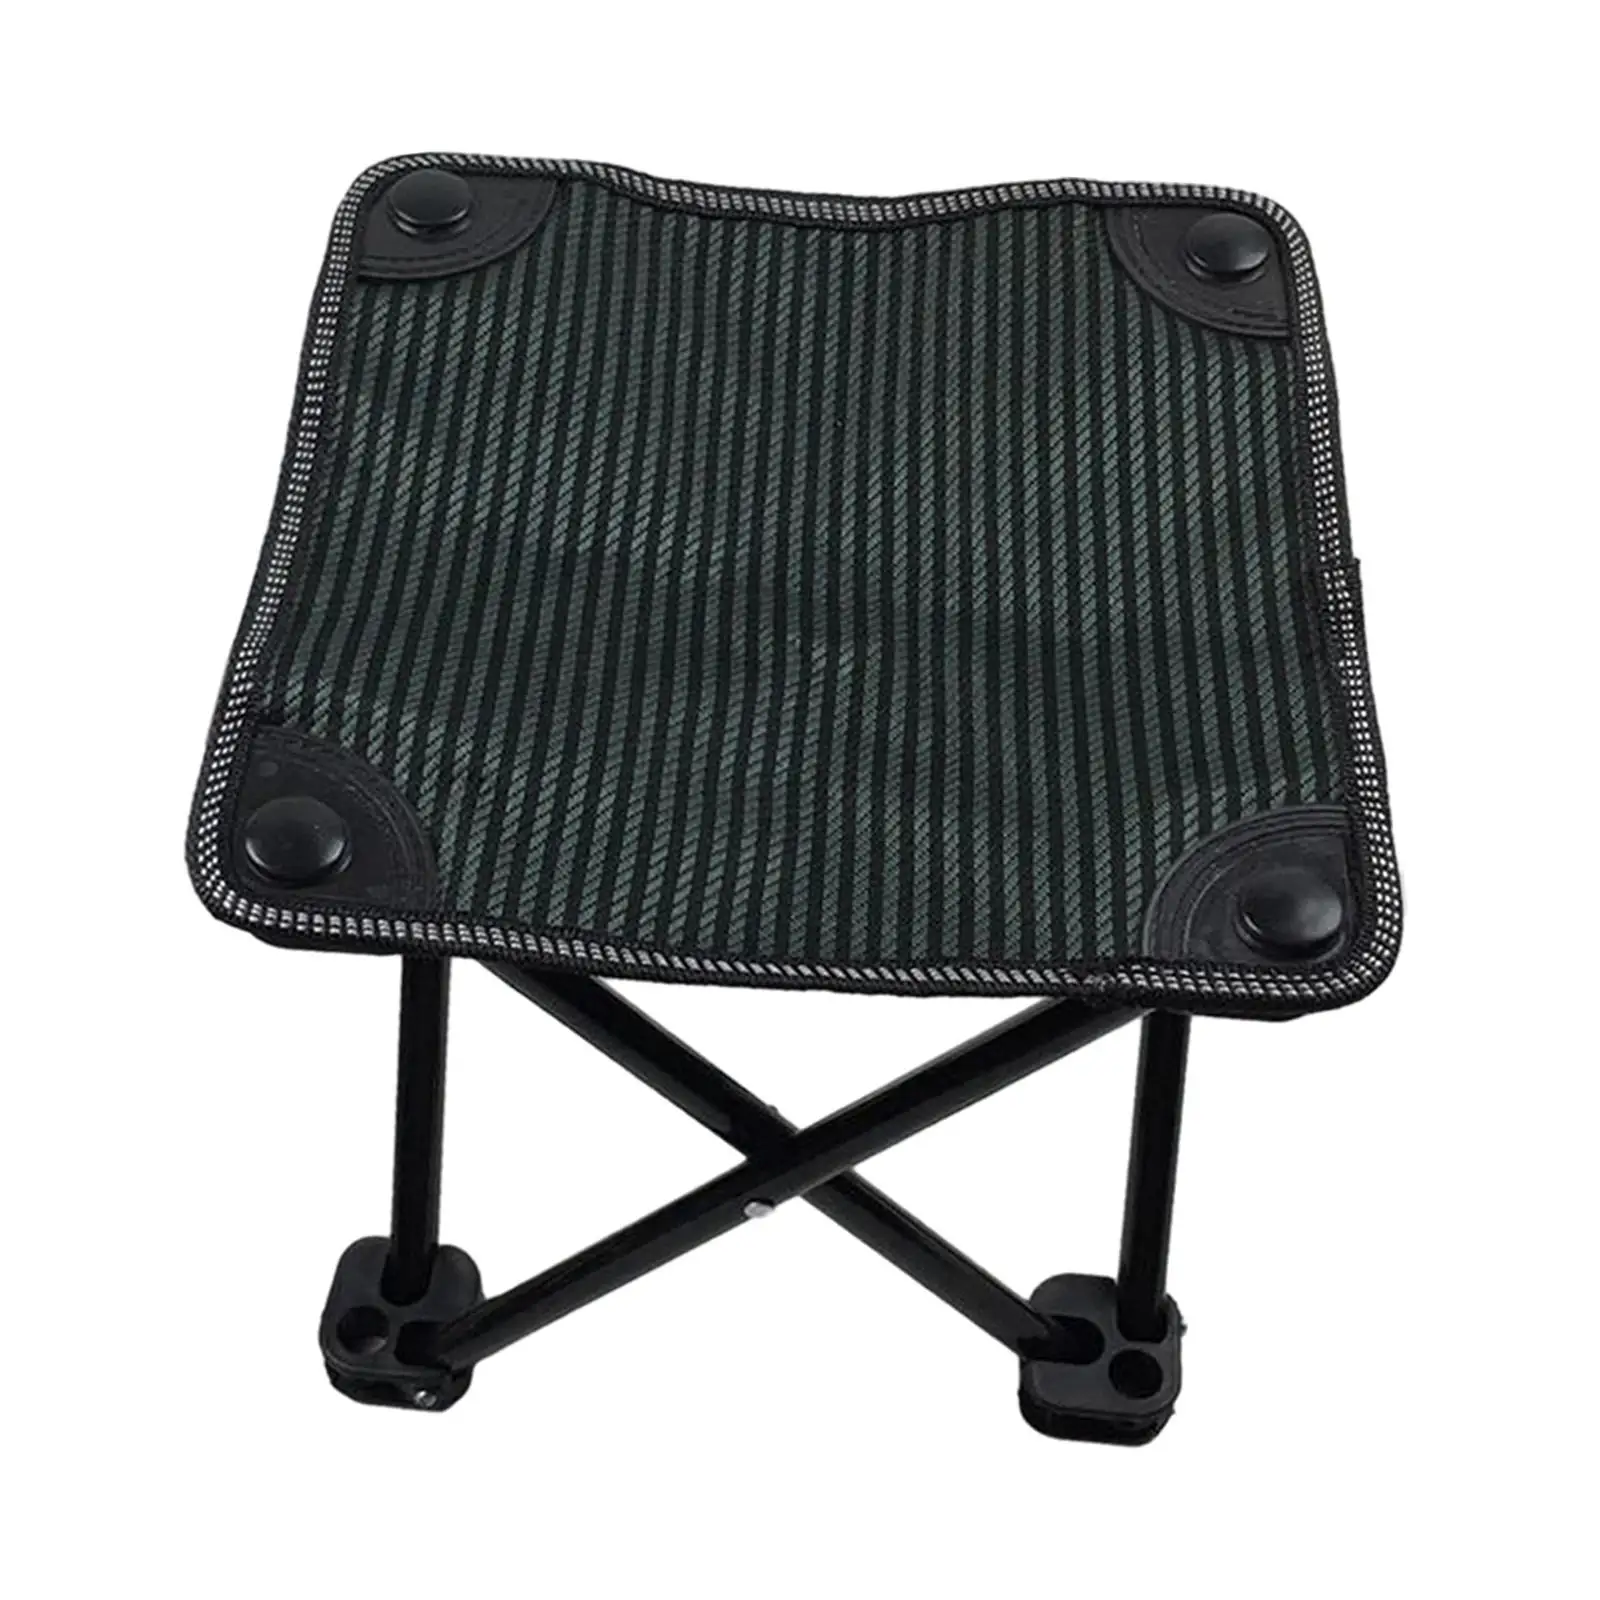 Camping Folding Stool recliner Foot Rest Footrest Compact Saddle Chair Collapsible Stool for Lawn Patio Traveling Concert Garden